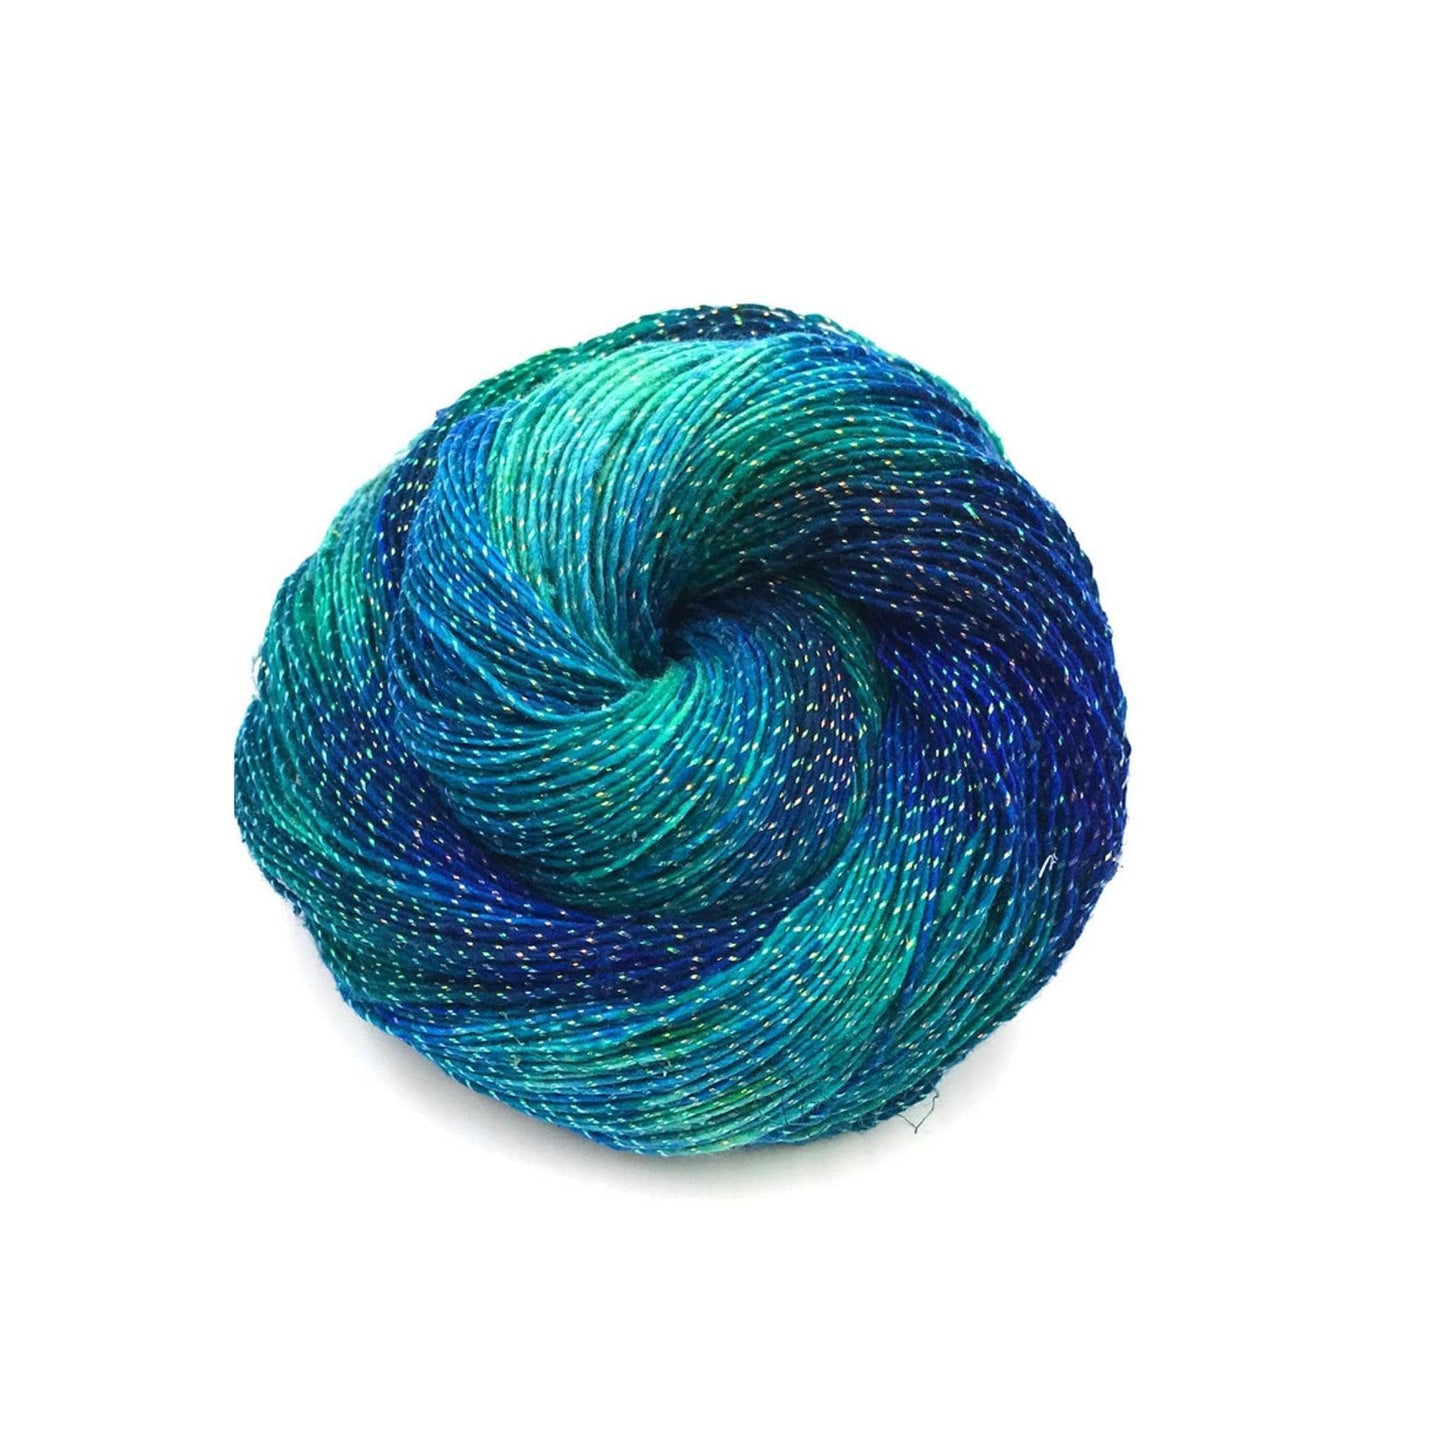 Lace weight silk yarn in color sparkle enchanted forest (blue, green and sparkle) in front of white background.